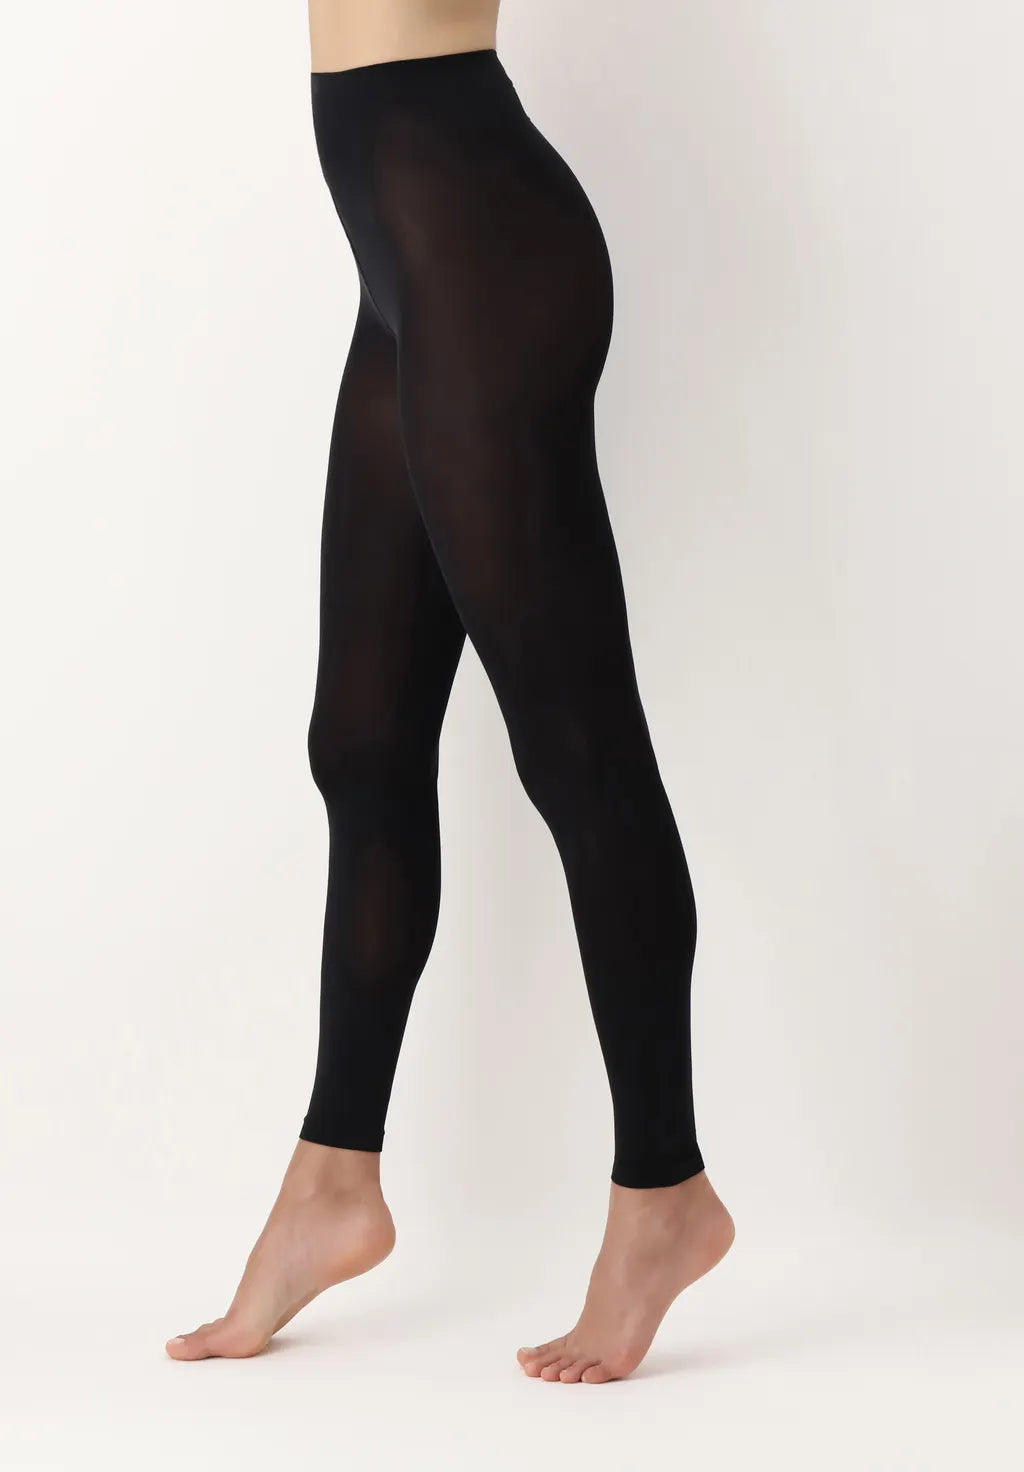 OroblÌ_ All Colors Leggings - Black soft matte opaque footless tights with deep comfort waist band, flat seams and gusset.